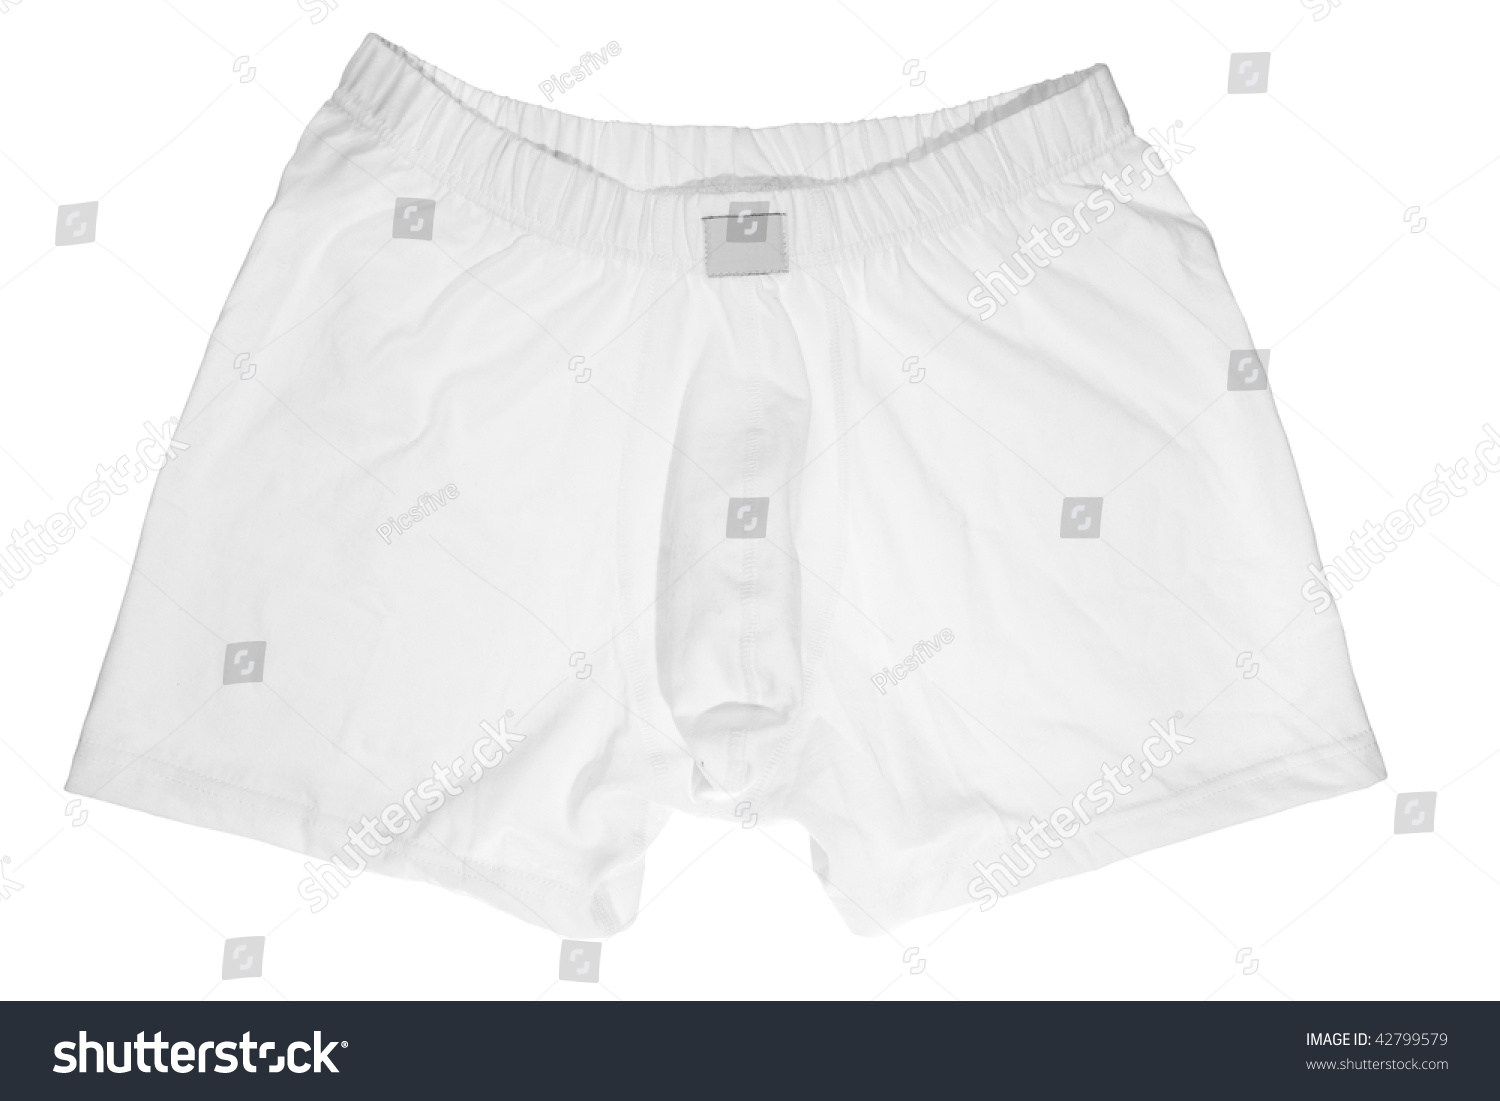 Close Up Of Man Underwear On White Background With Clipping Path Stock ...